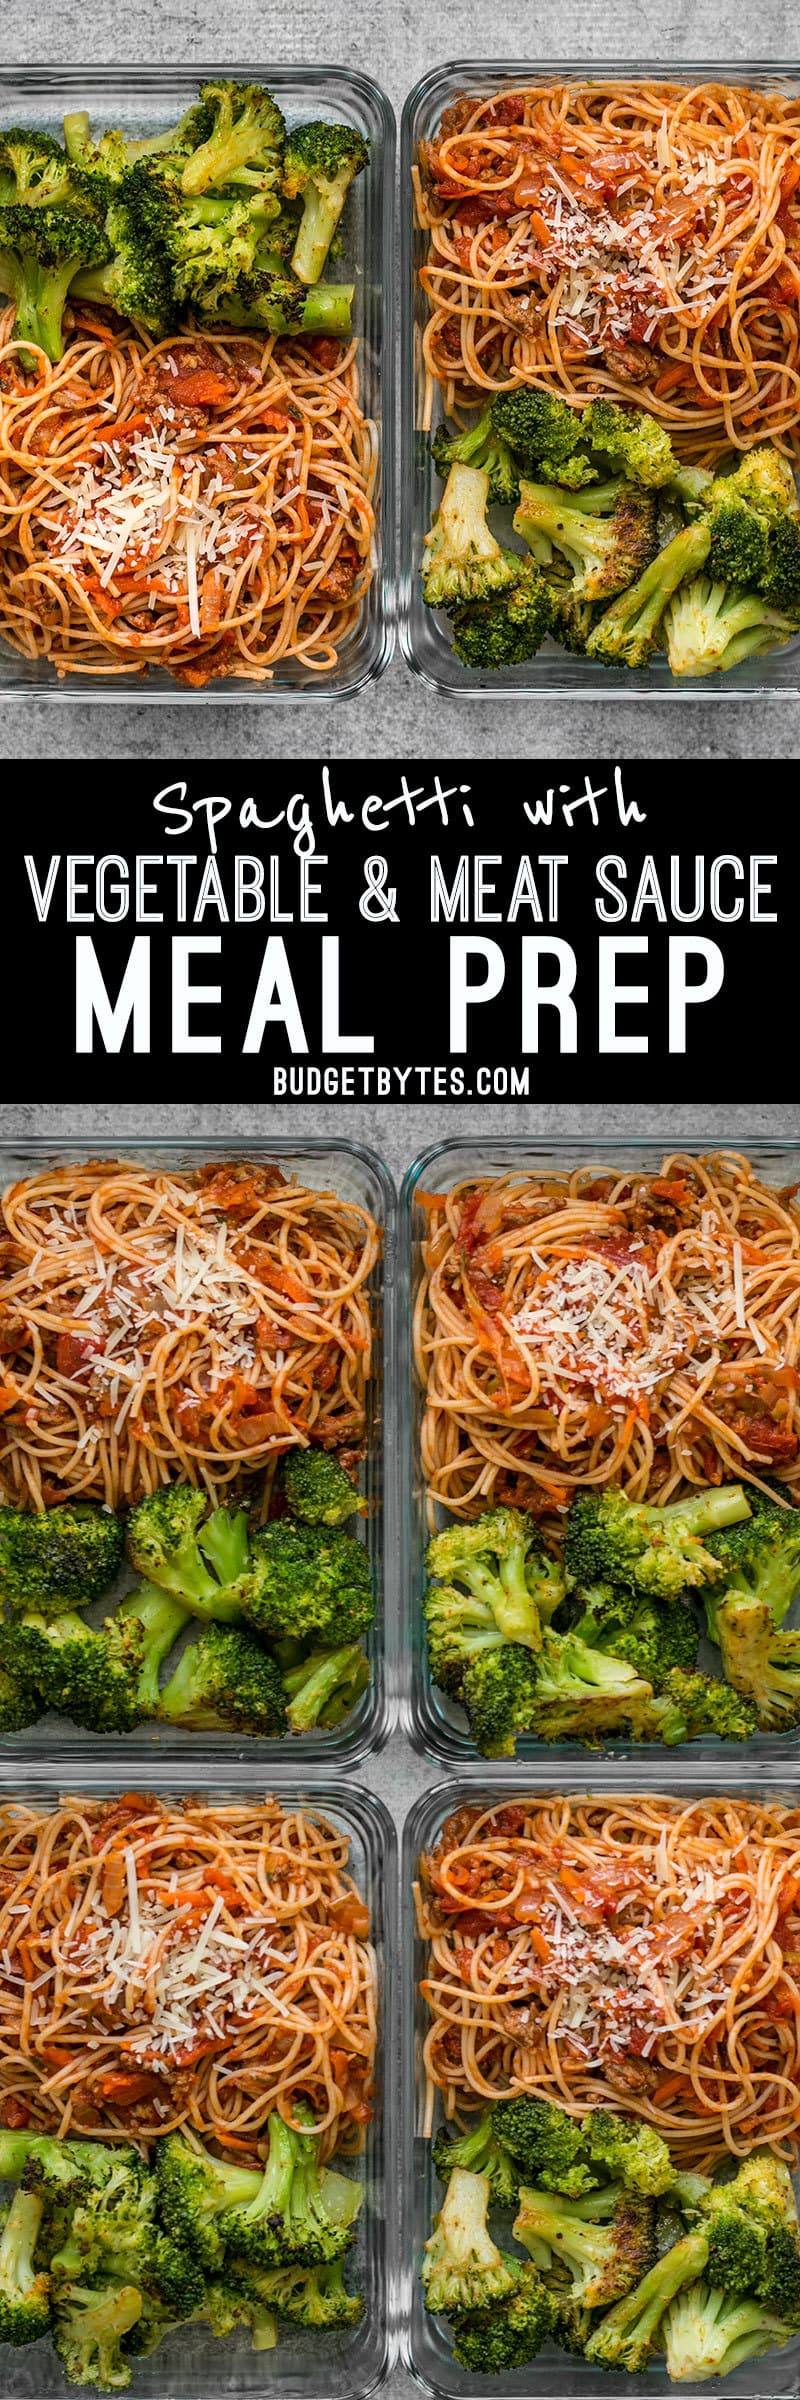 This simple Spaghetti Meal Prep is hiding a ton of good-for-you vegetables in a classic comforting dish. BudgetBytes.com